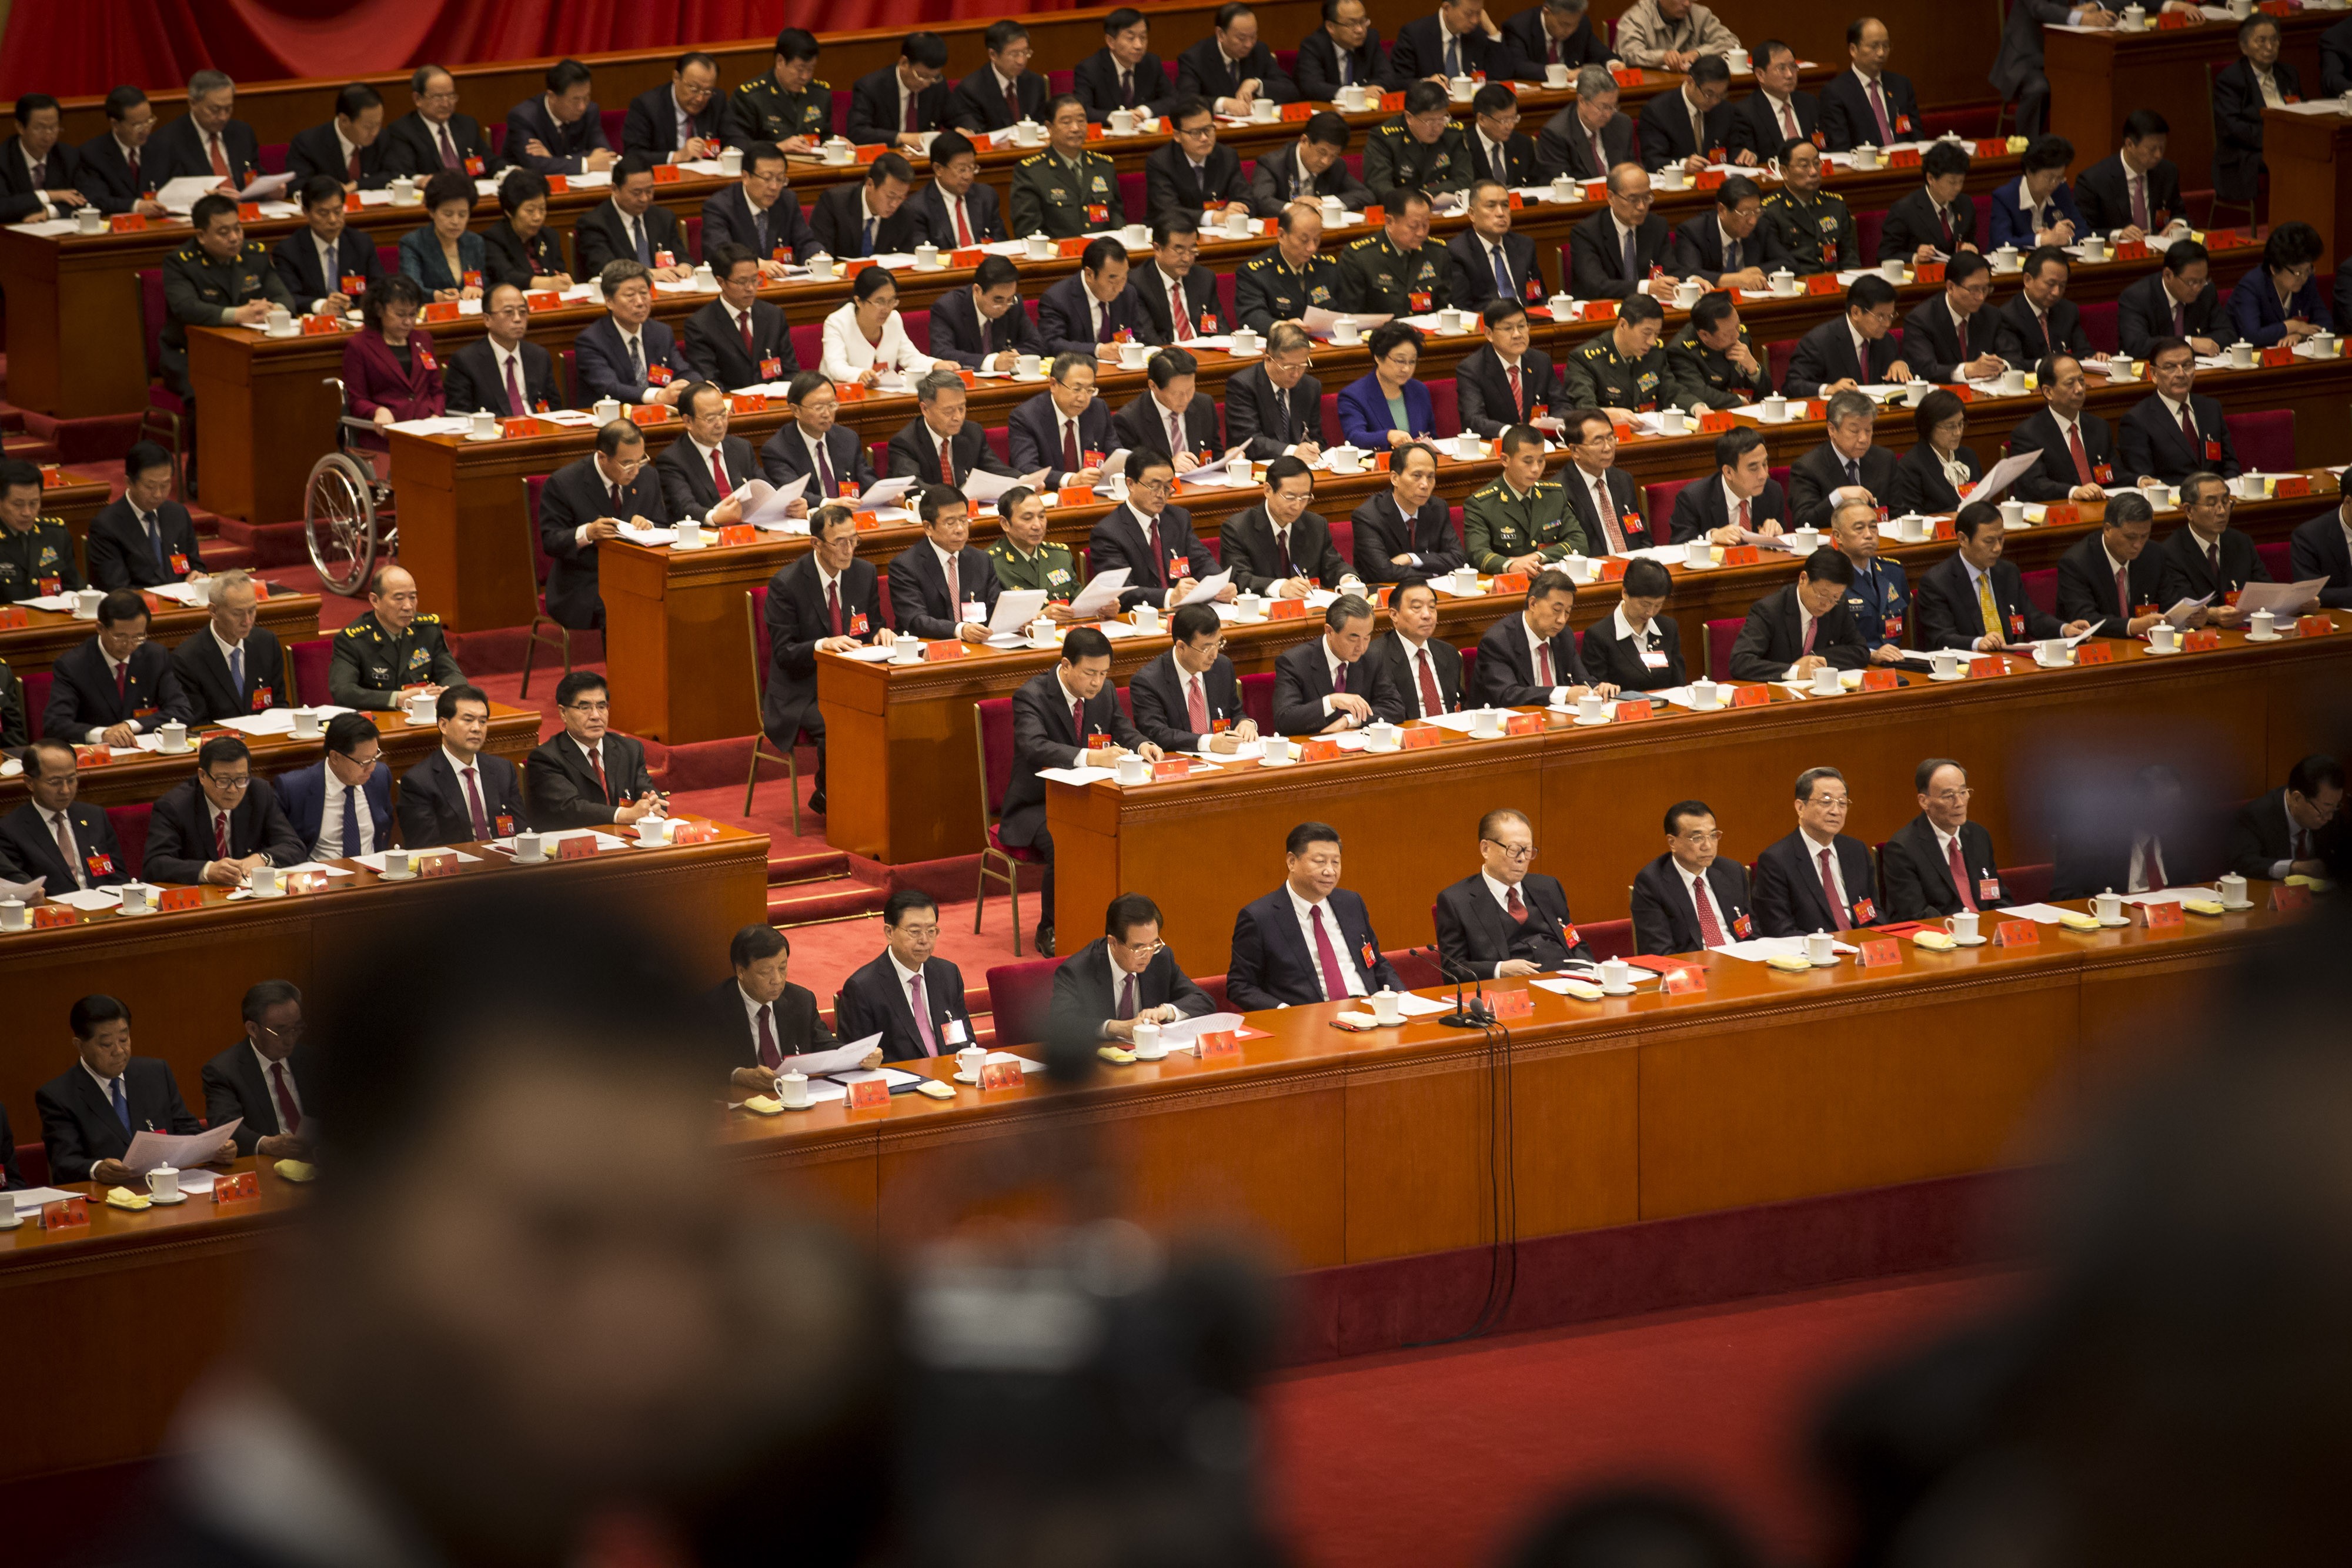 Xi Jinping, China's president, and other leaders and delegates attend the closing session of the 19th National Congress at the Great Hall of the People in Beijing. Photo: Bloomberg